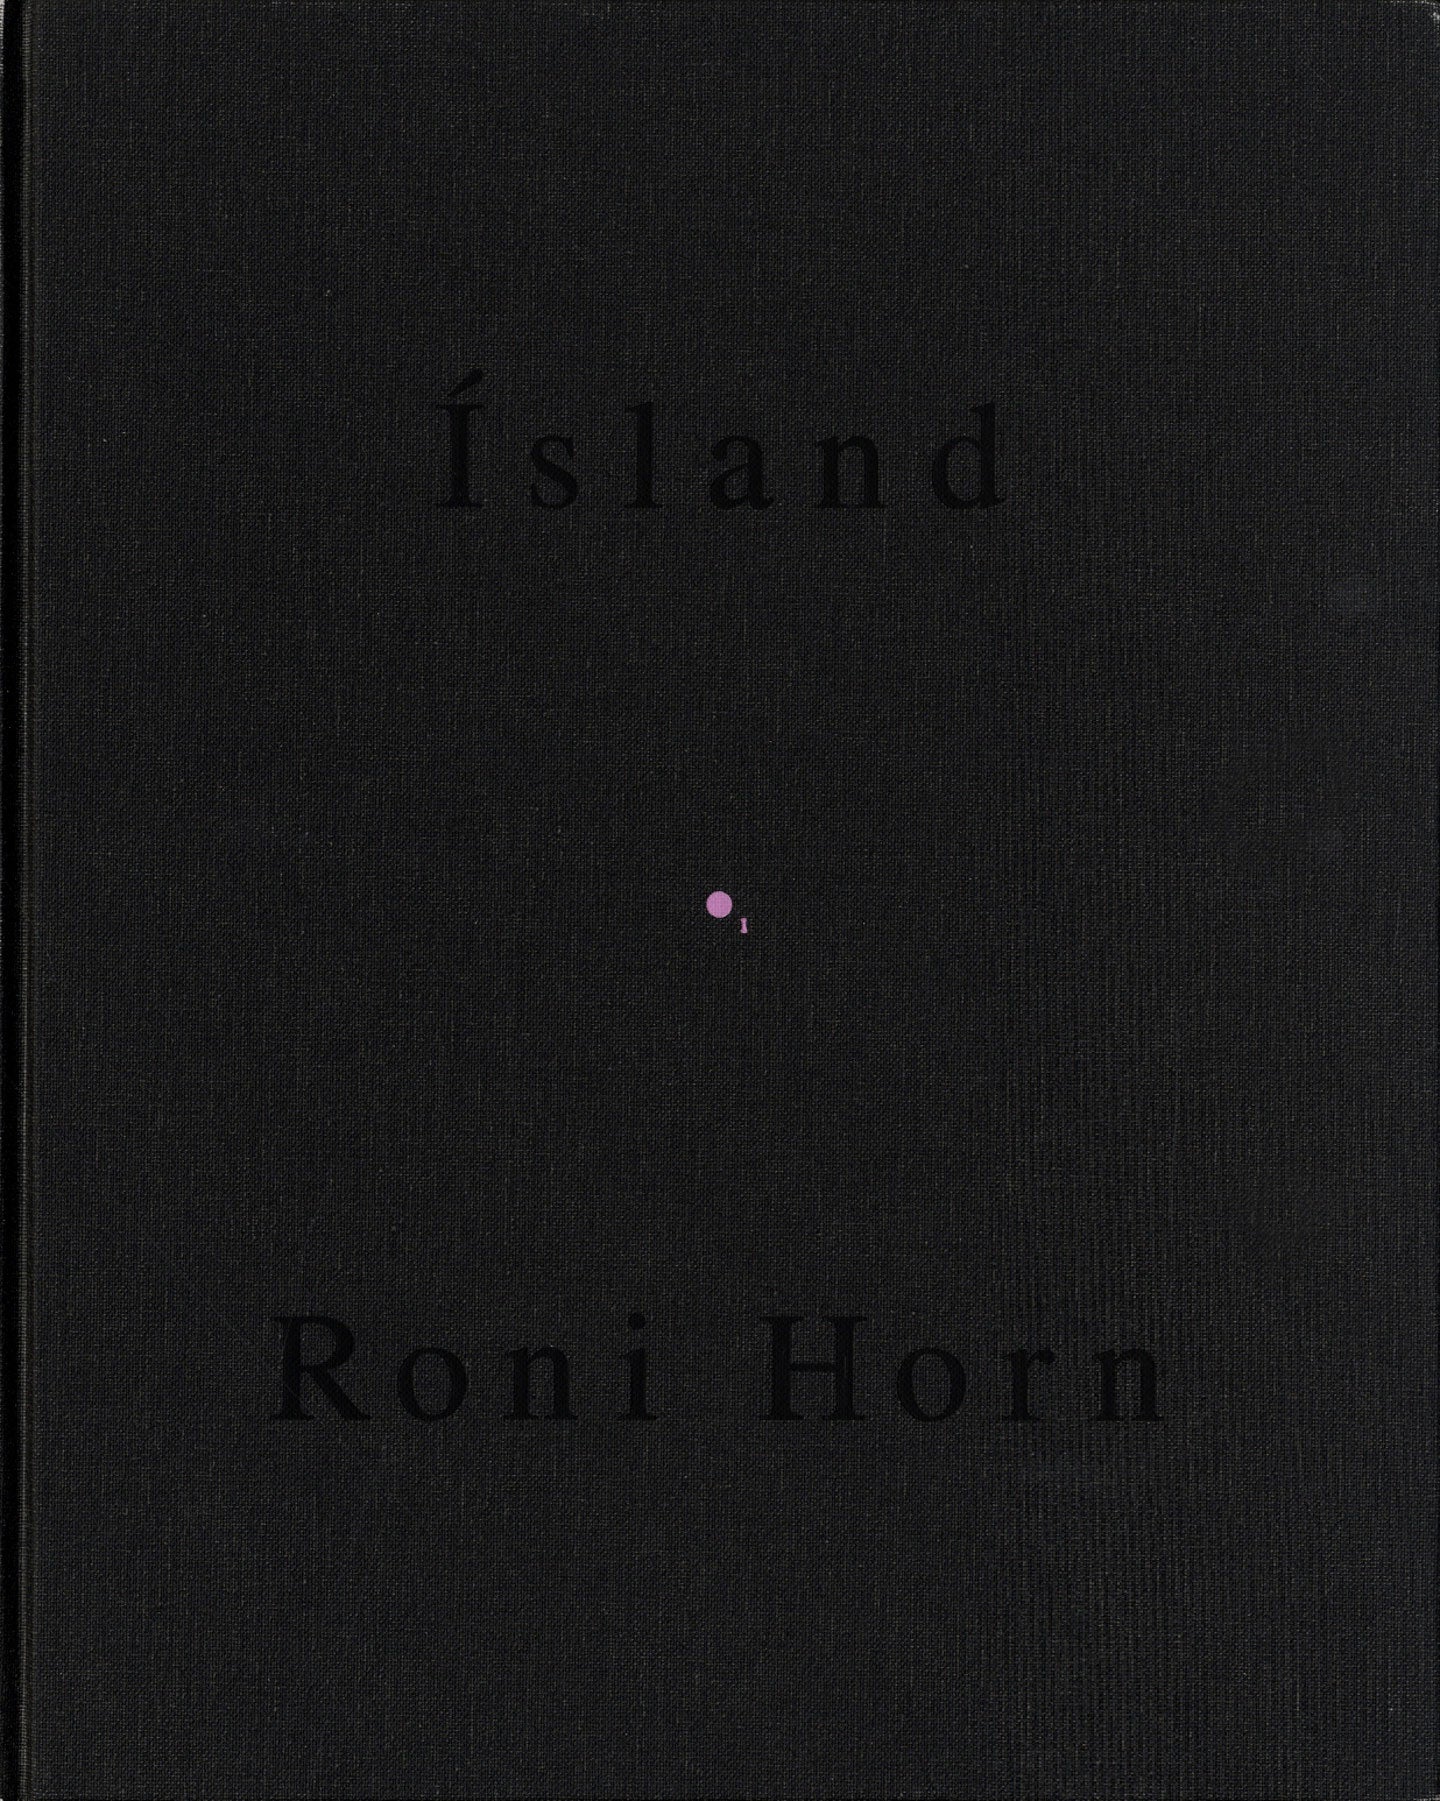 Roni Horn: Pooling Waters (Ísland (Iceland): To Place 4: Two Volume Set) [SIGNED]